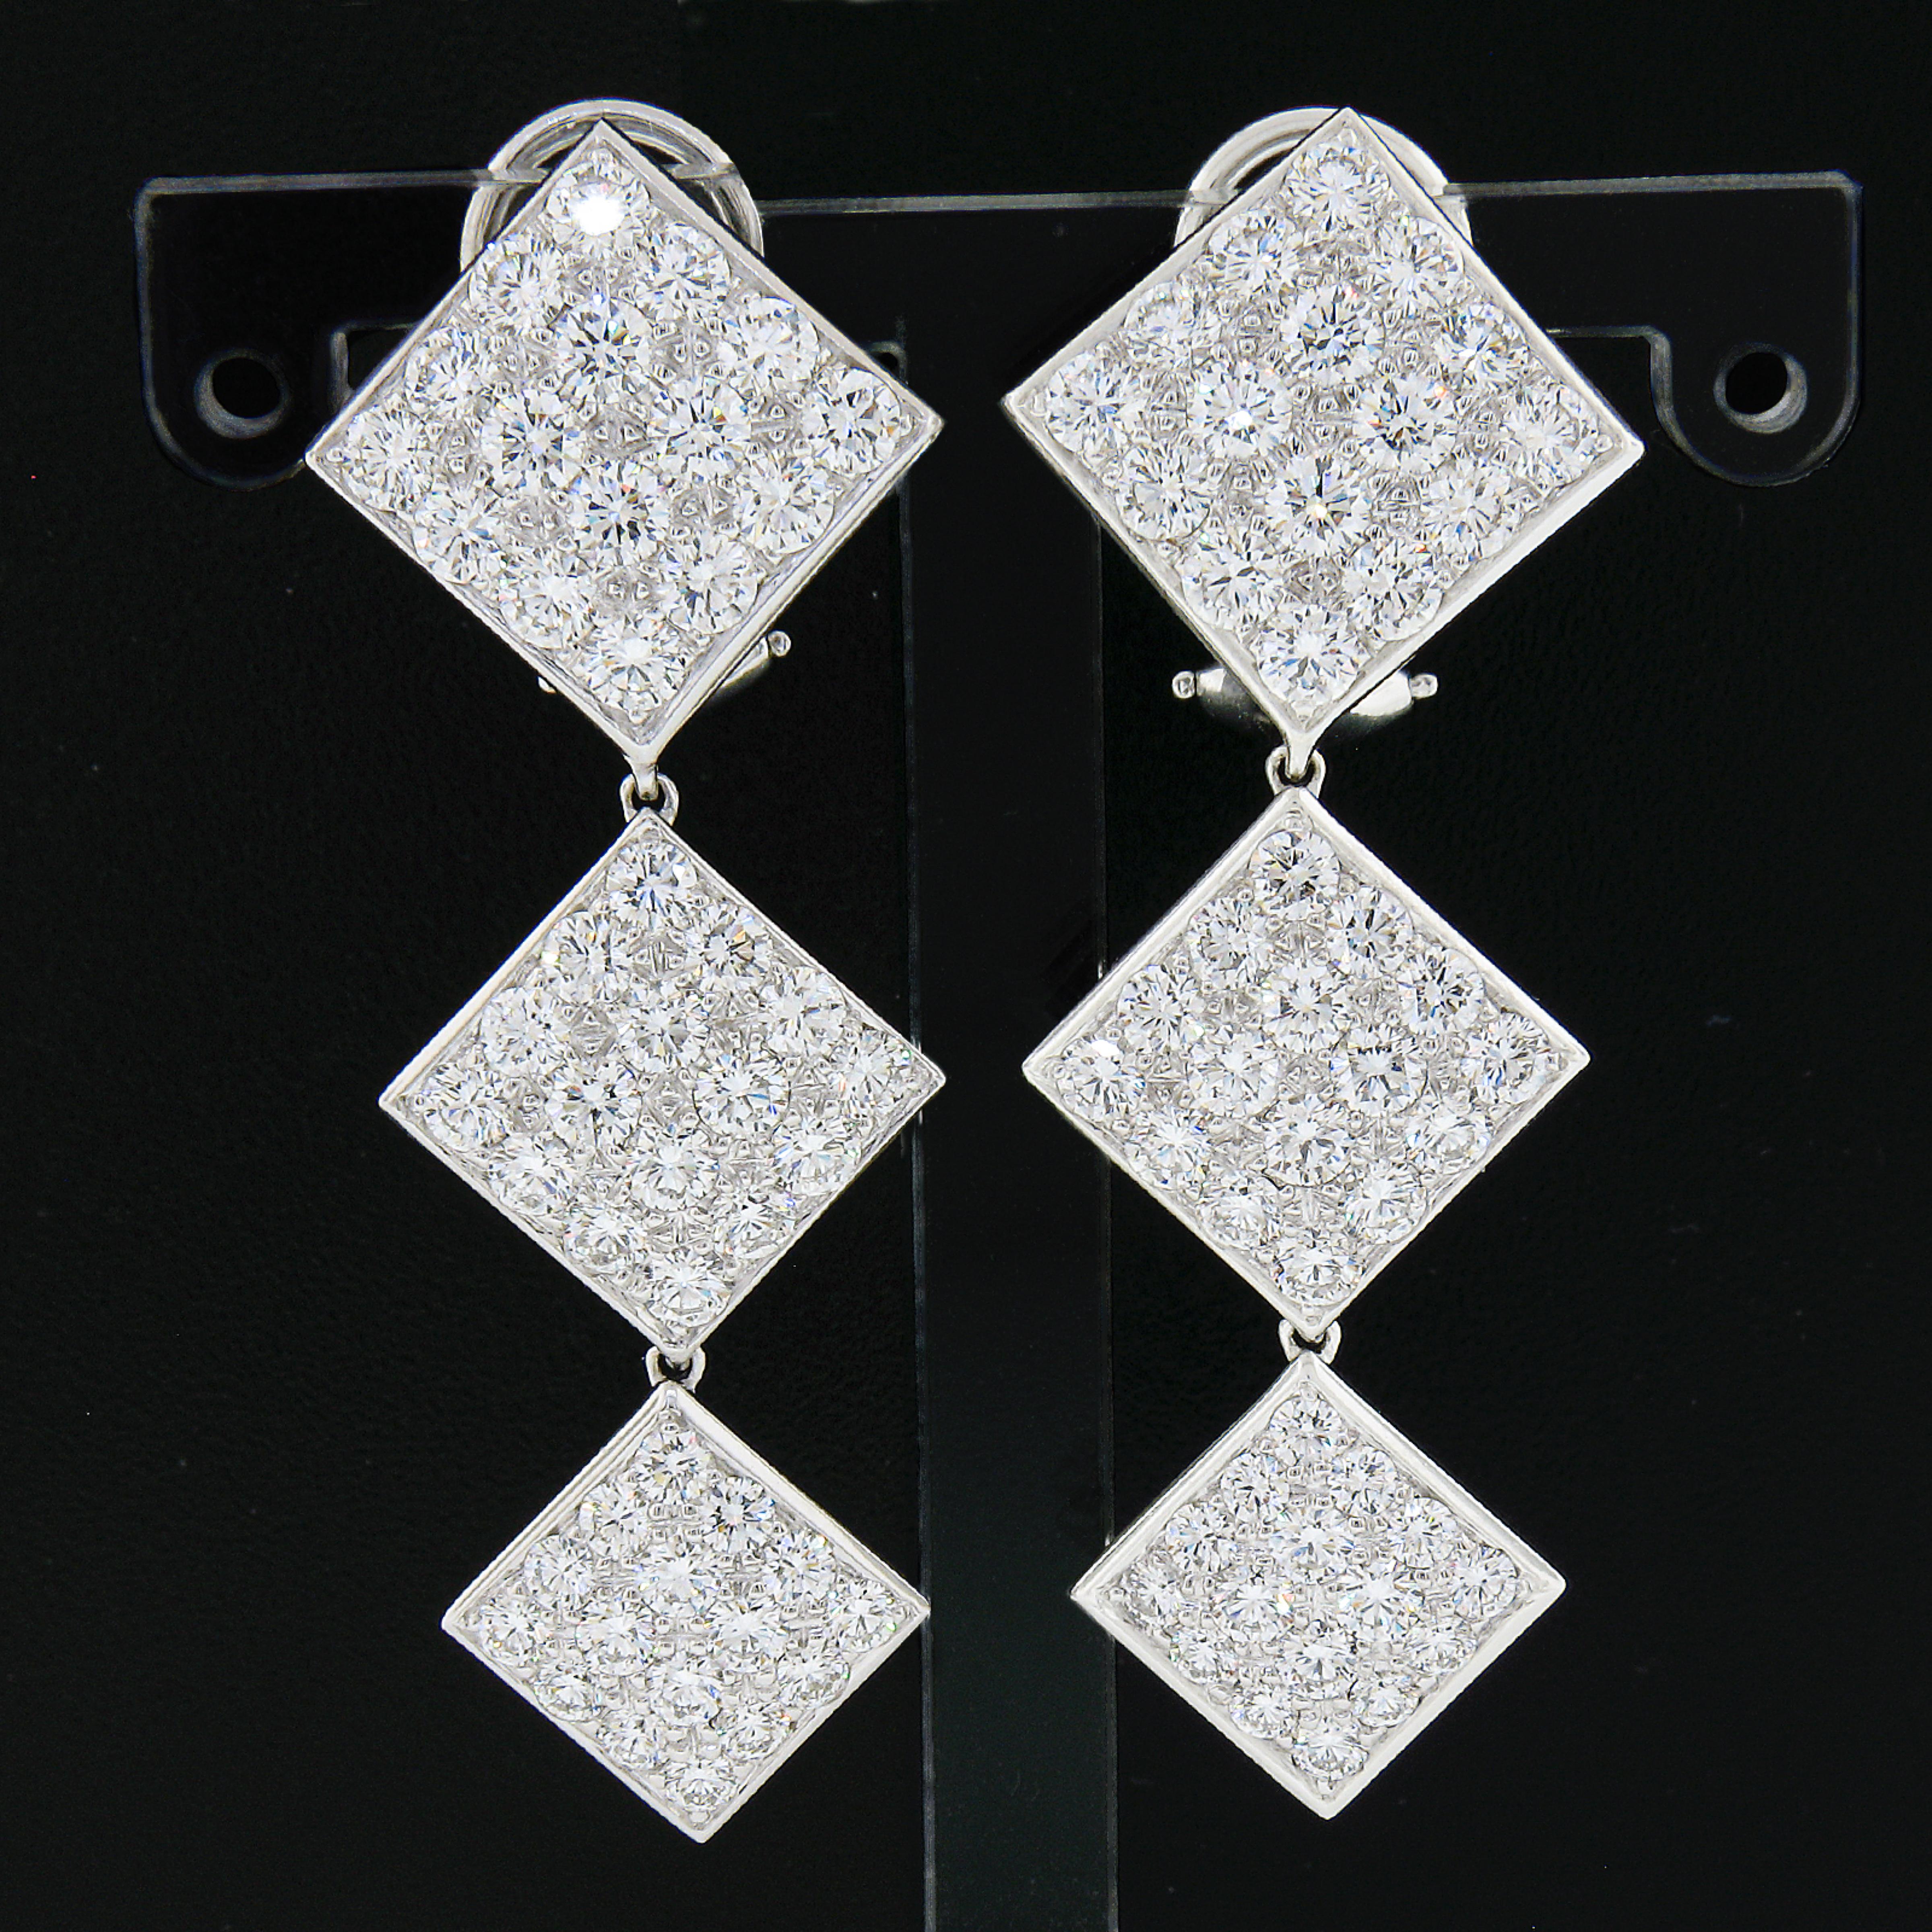 This breathtaking pair of statement diamond dangle earrings is crafted in solid 18k white gold and are drenched with approximately 6 carats of SUPER FINE quality round brilliant cut diamonds throughout. These diamonds are perfectly pave set